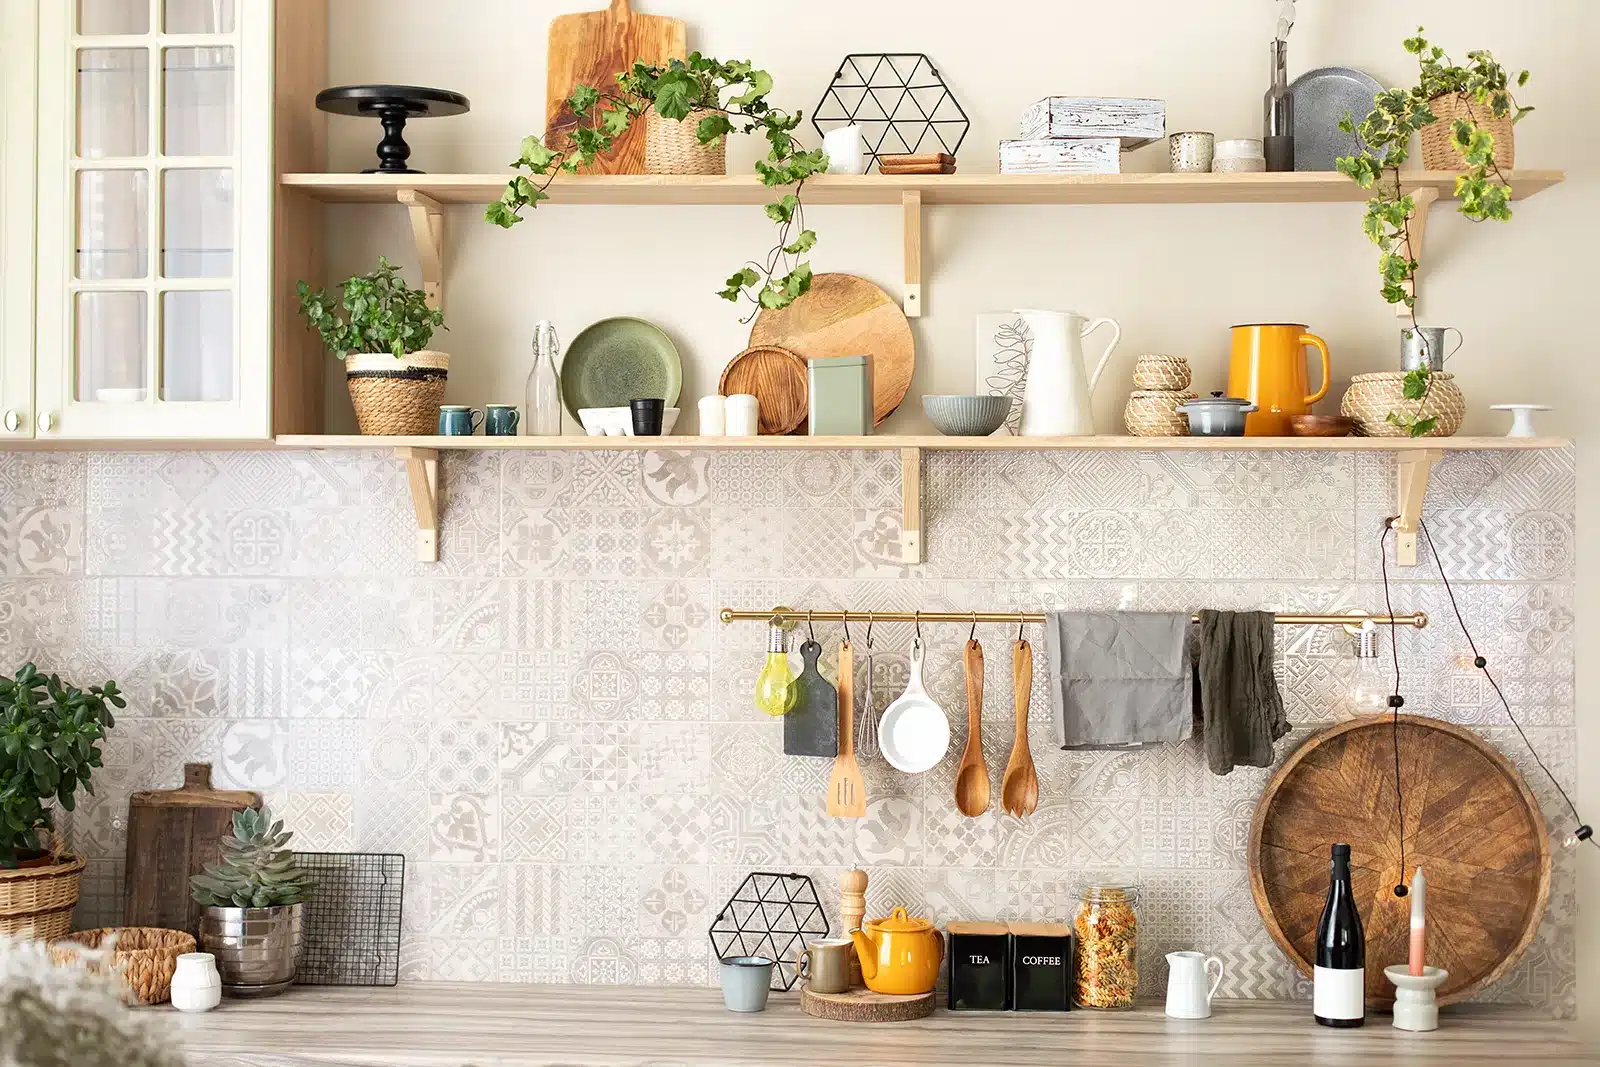 A kitchen's rustic charm is accentuated by a patterned tile backsplash, wooden shelves adorned with plants and kitchenware, and utensils hanging neatly below.